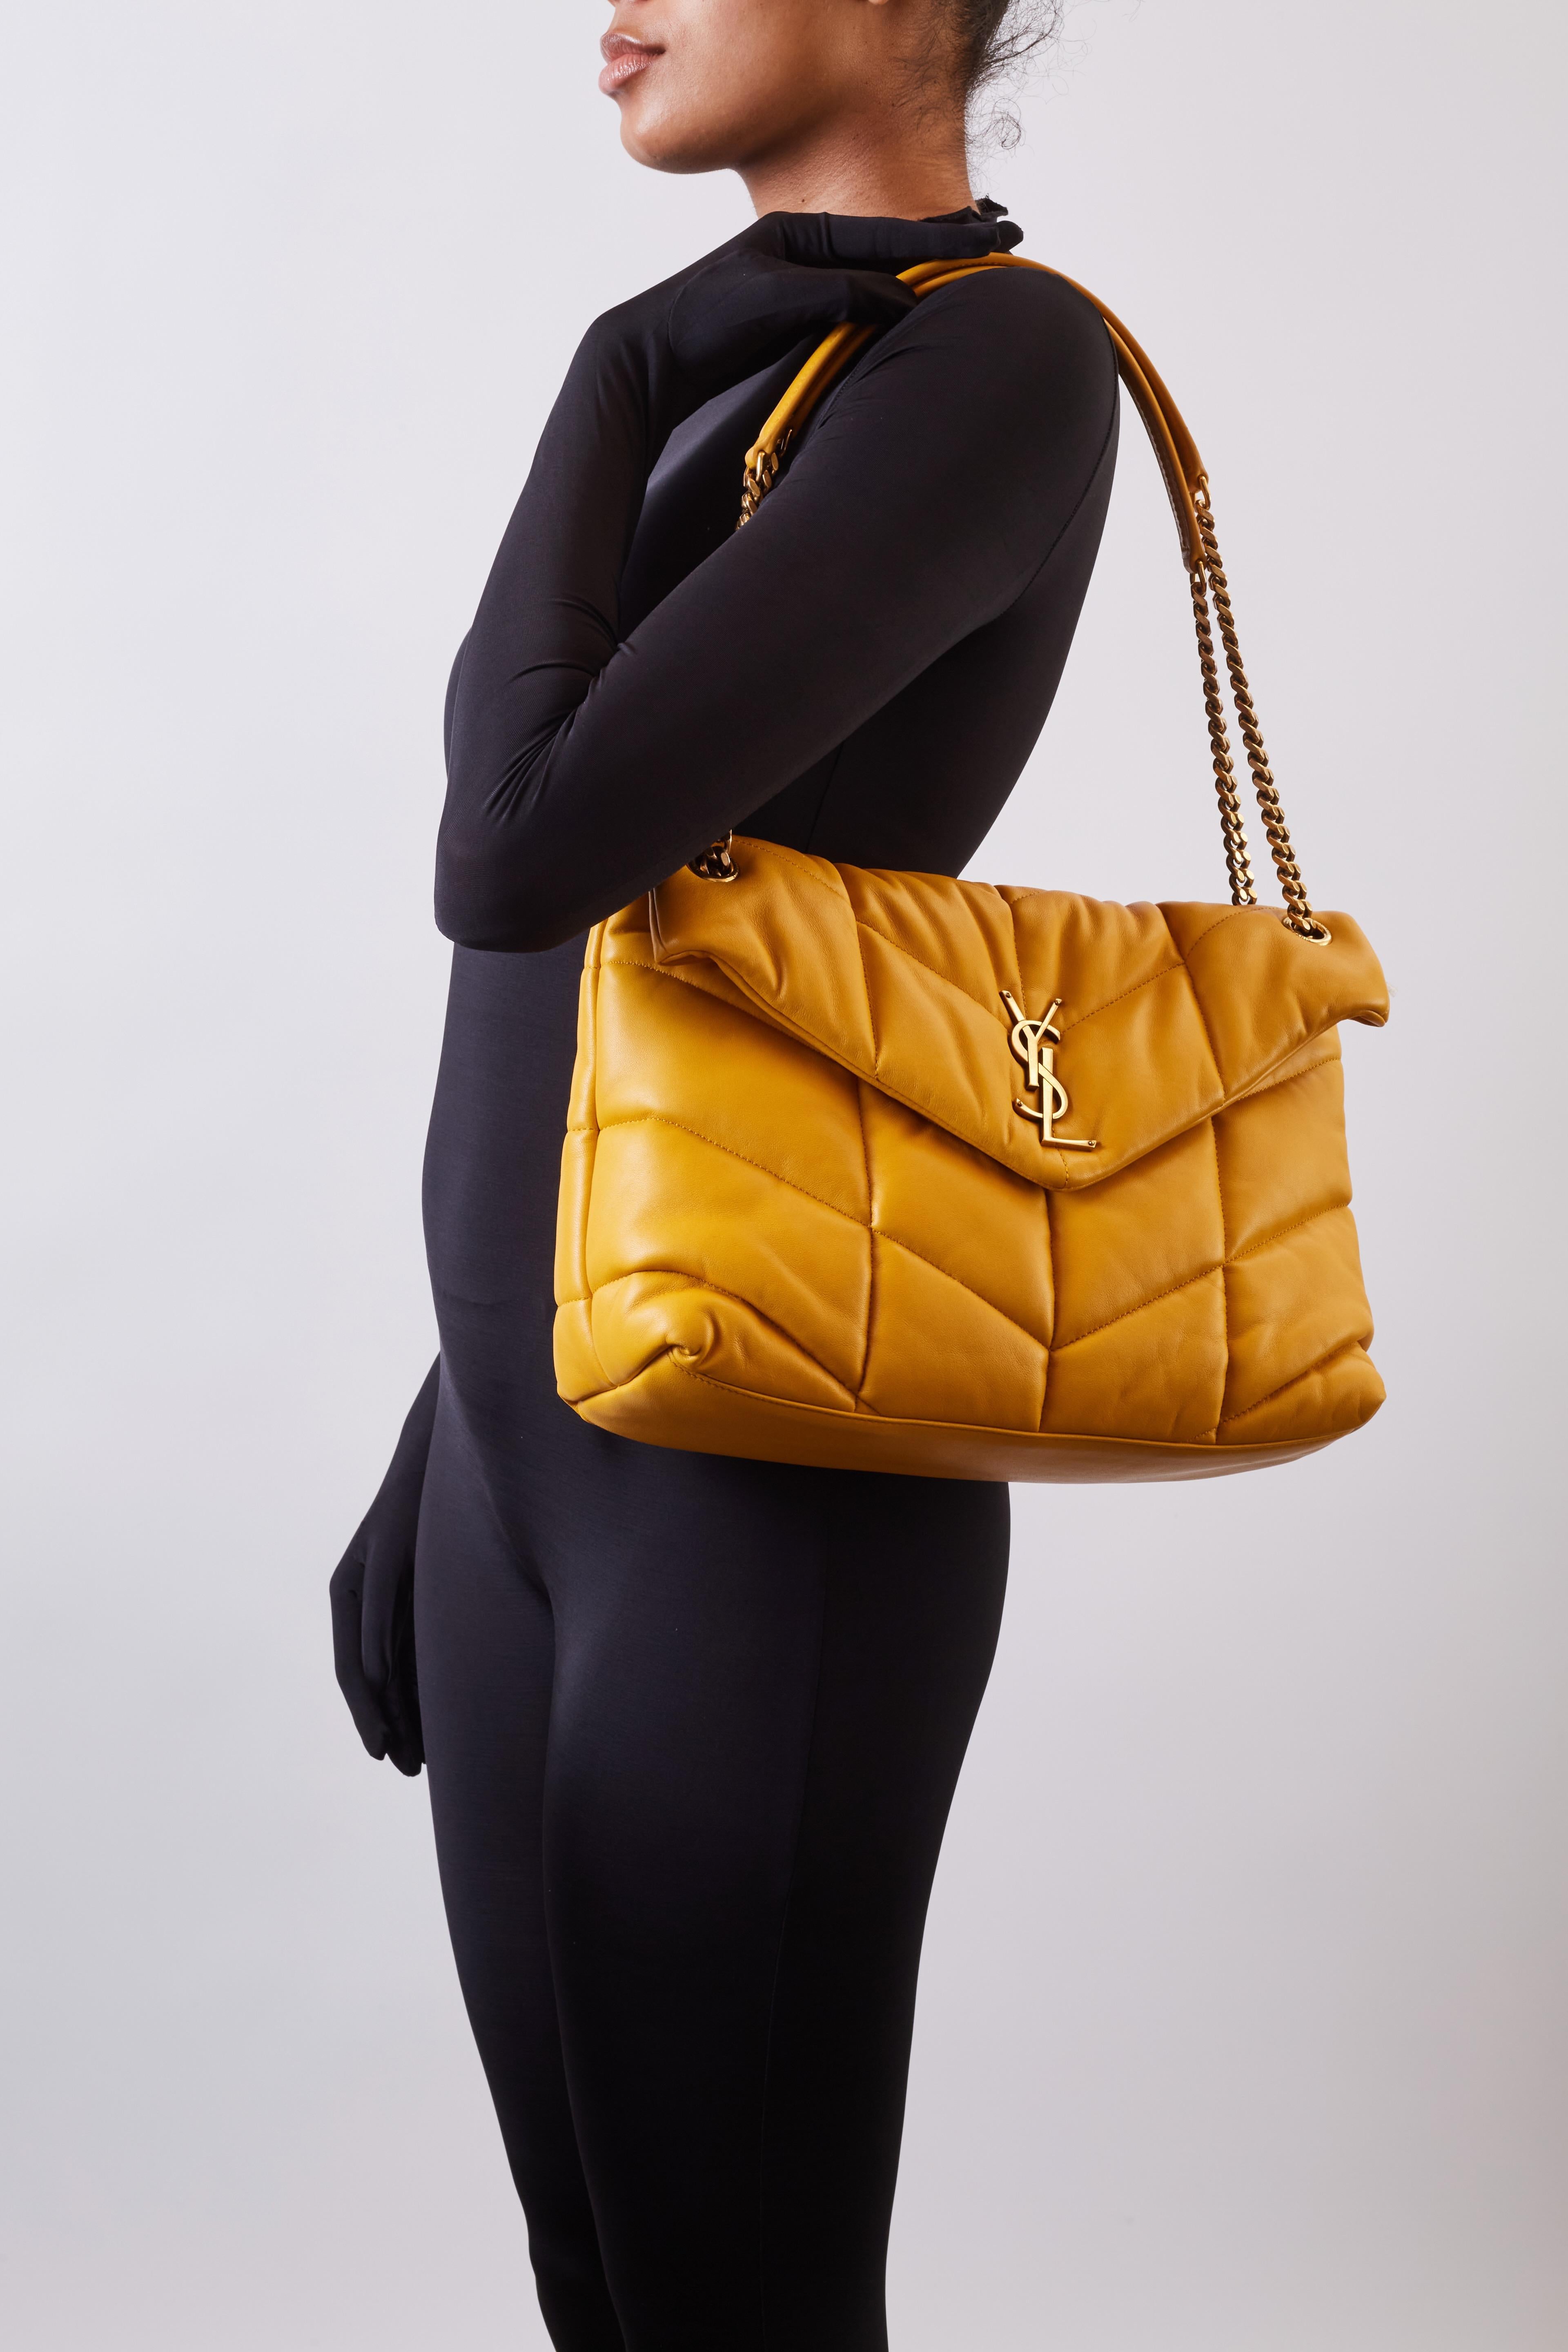 This famous style Saint Laurent bag is called the Loulou puffer shoulder bag and this is size medium. The bag is made with soft and supple lambskin leather in dark yellow/saffran and features a sliding curb chain shoulder strap, leather strap pads,